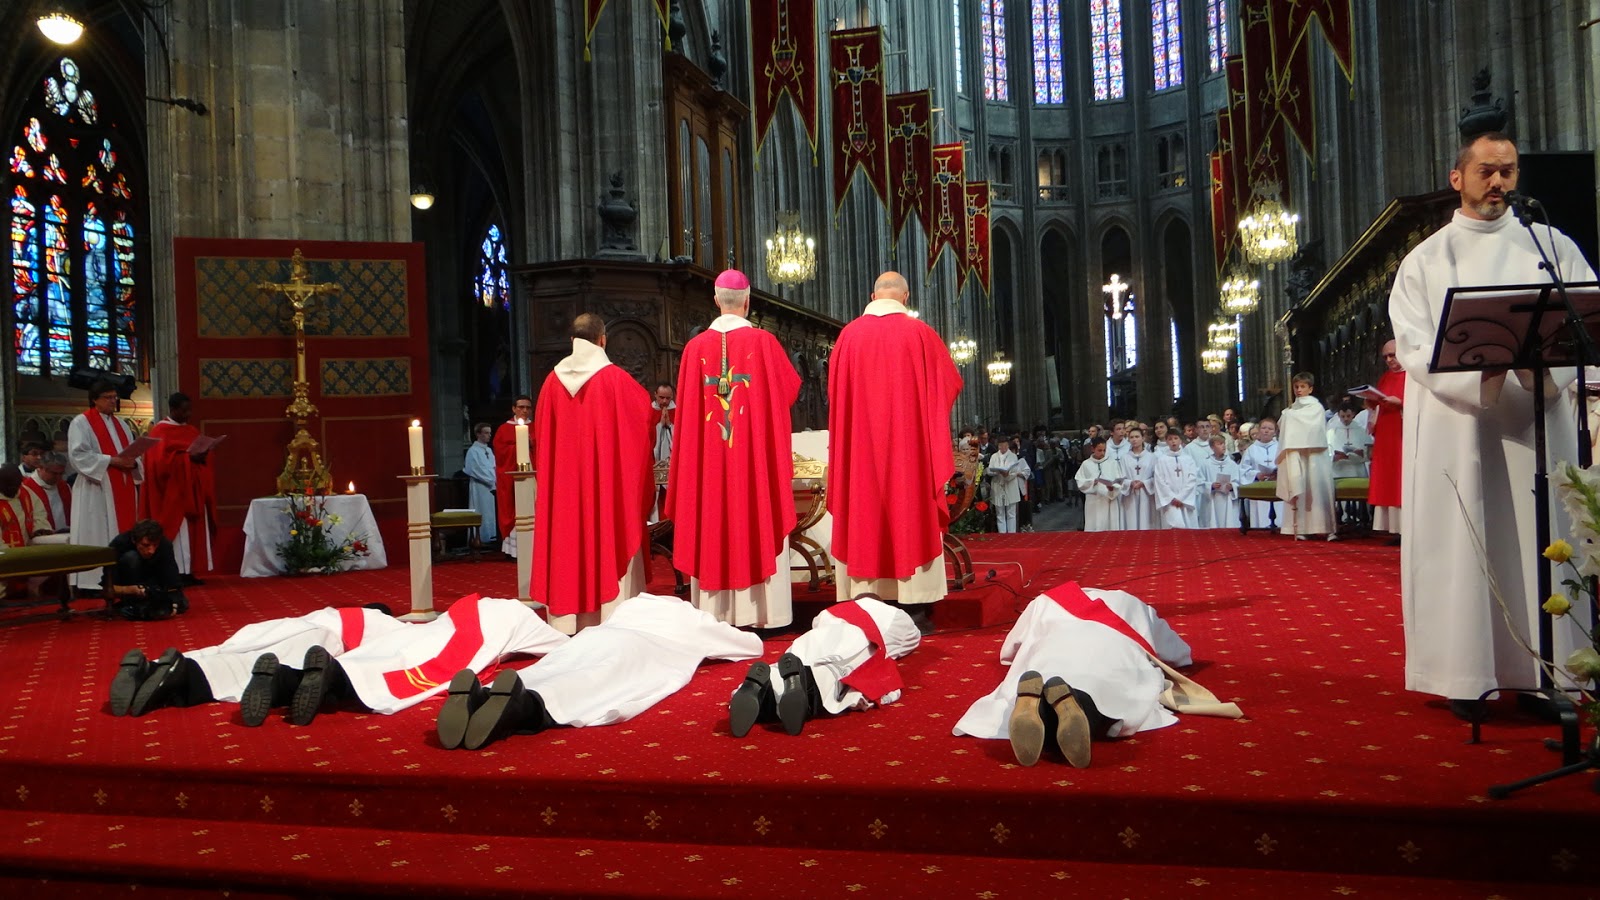 http://www.orleans.catholique.fr/galeries-photos/category/200-ordinations2014.html